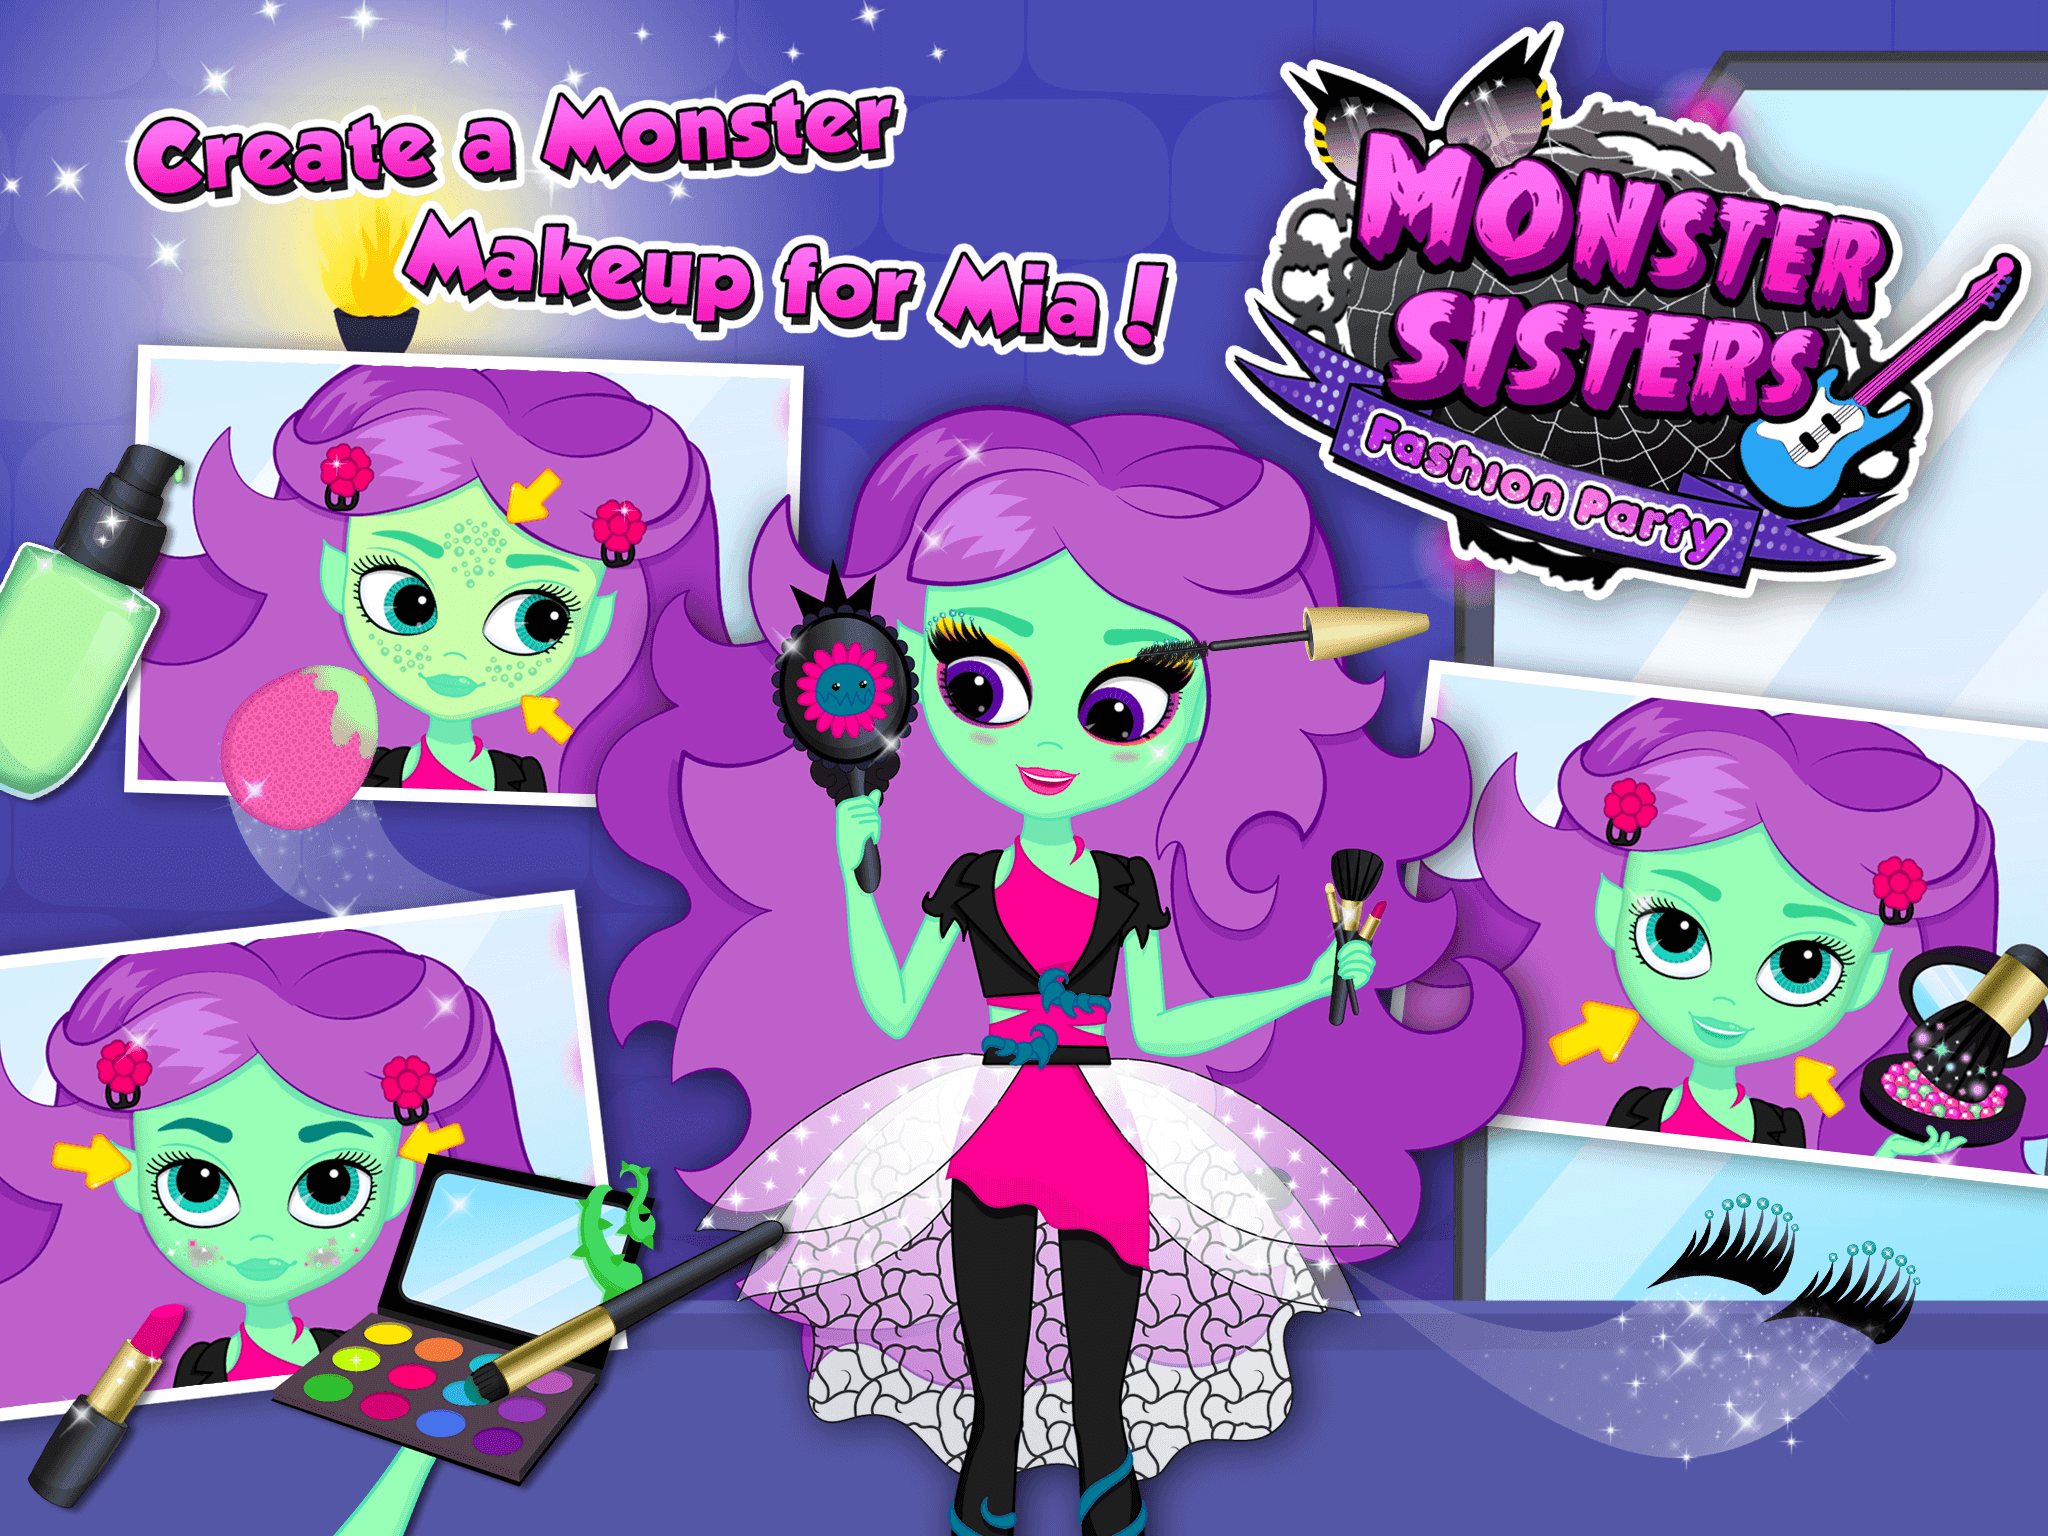 Monster Sisters Fashion Partyのキャプチャ